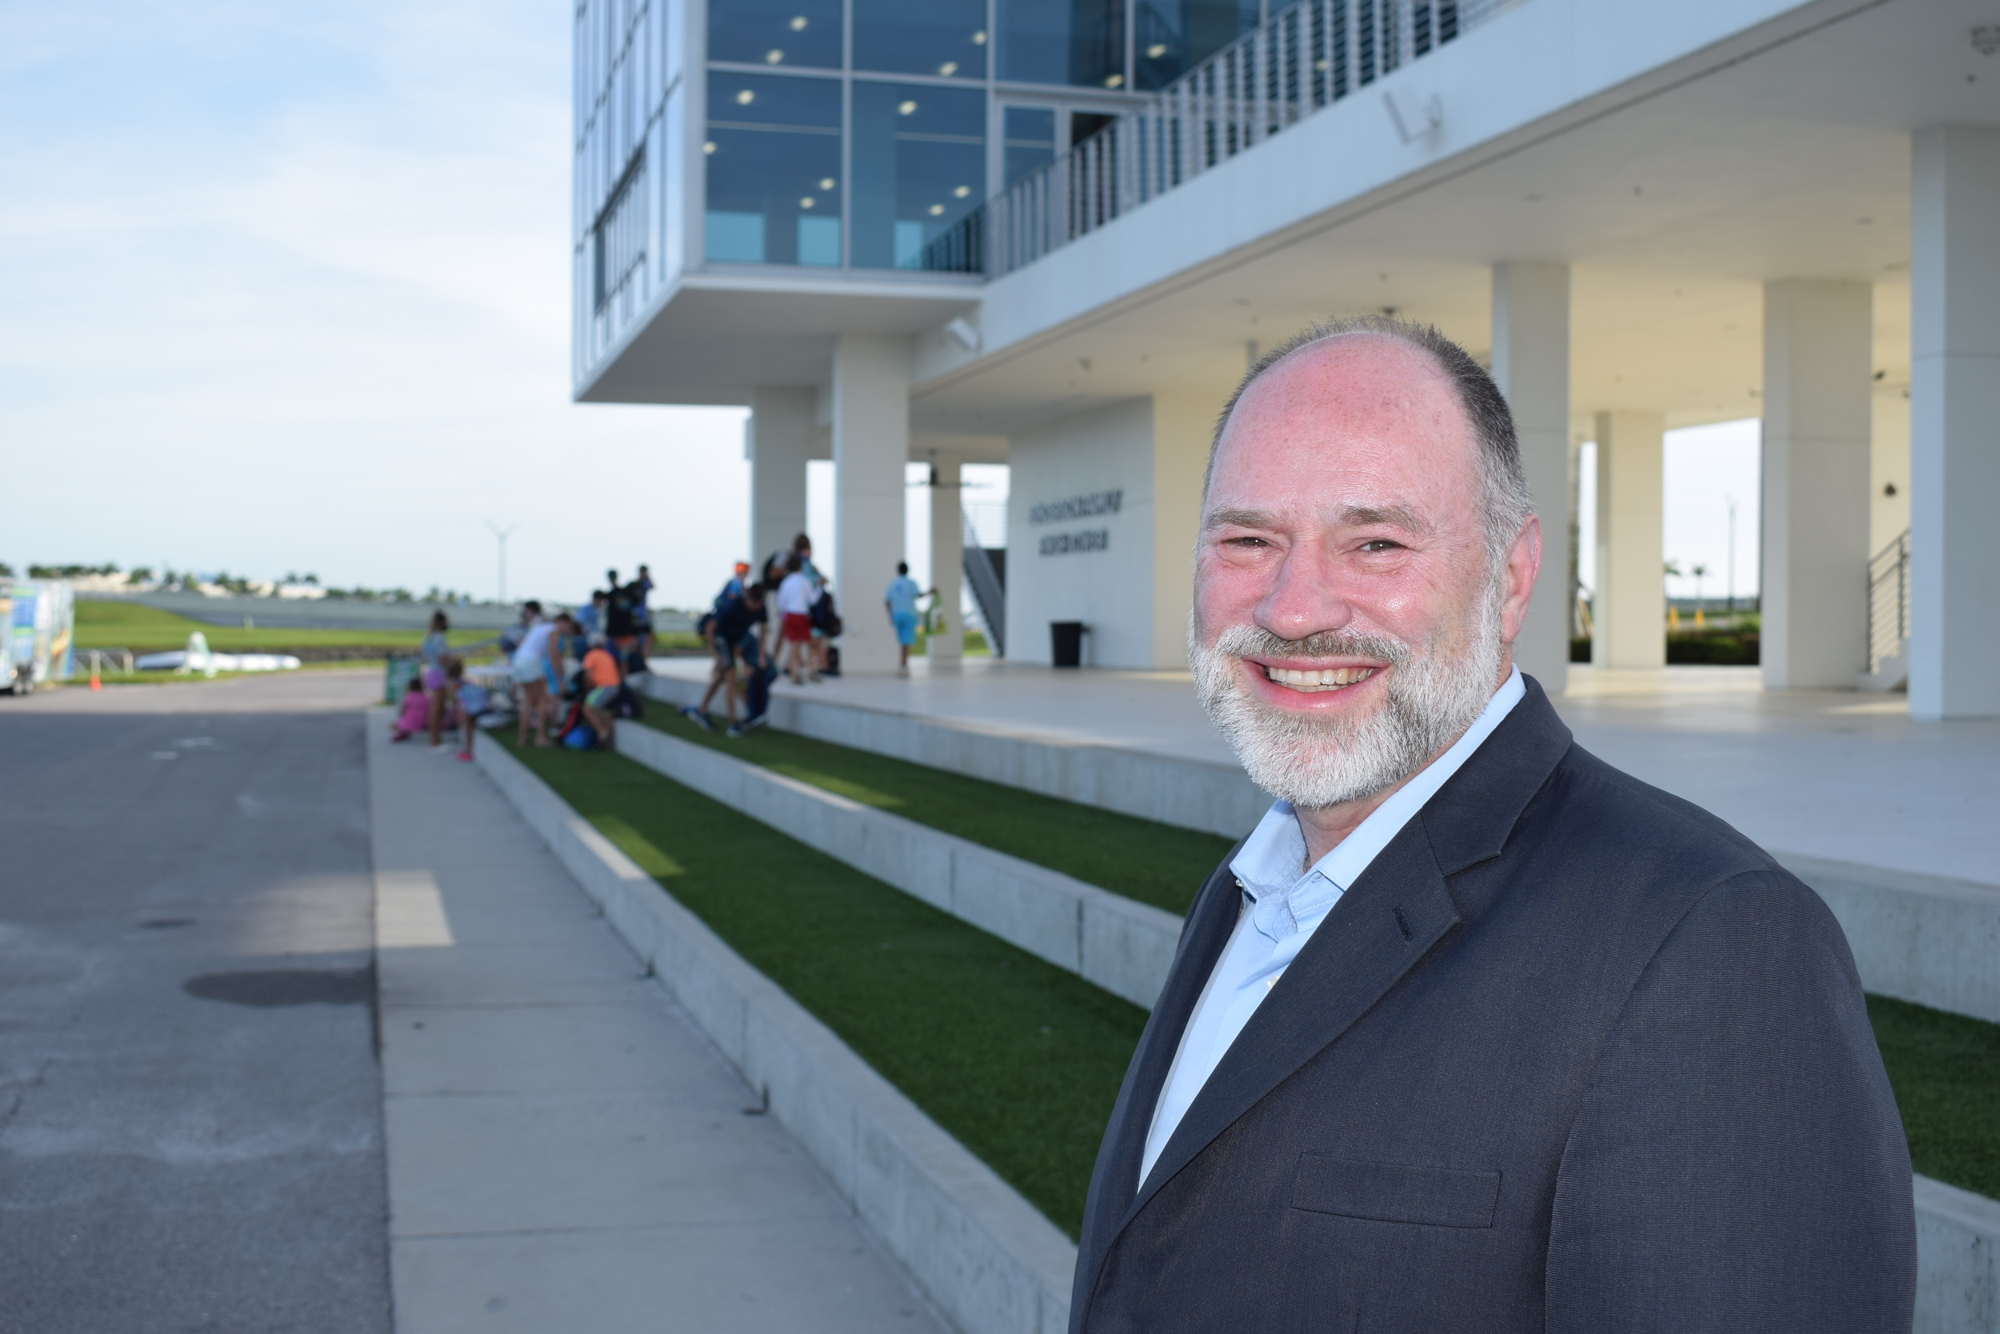 Tomás Herrera-Mishler, president and CEO of Suncoast Aquatic and Nature Center Associates, wants to transform Nathan Benderson Park into a major arts and culture hub in Sarasota and Manatee counties.